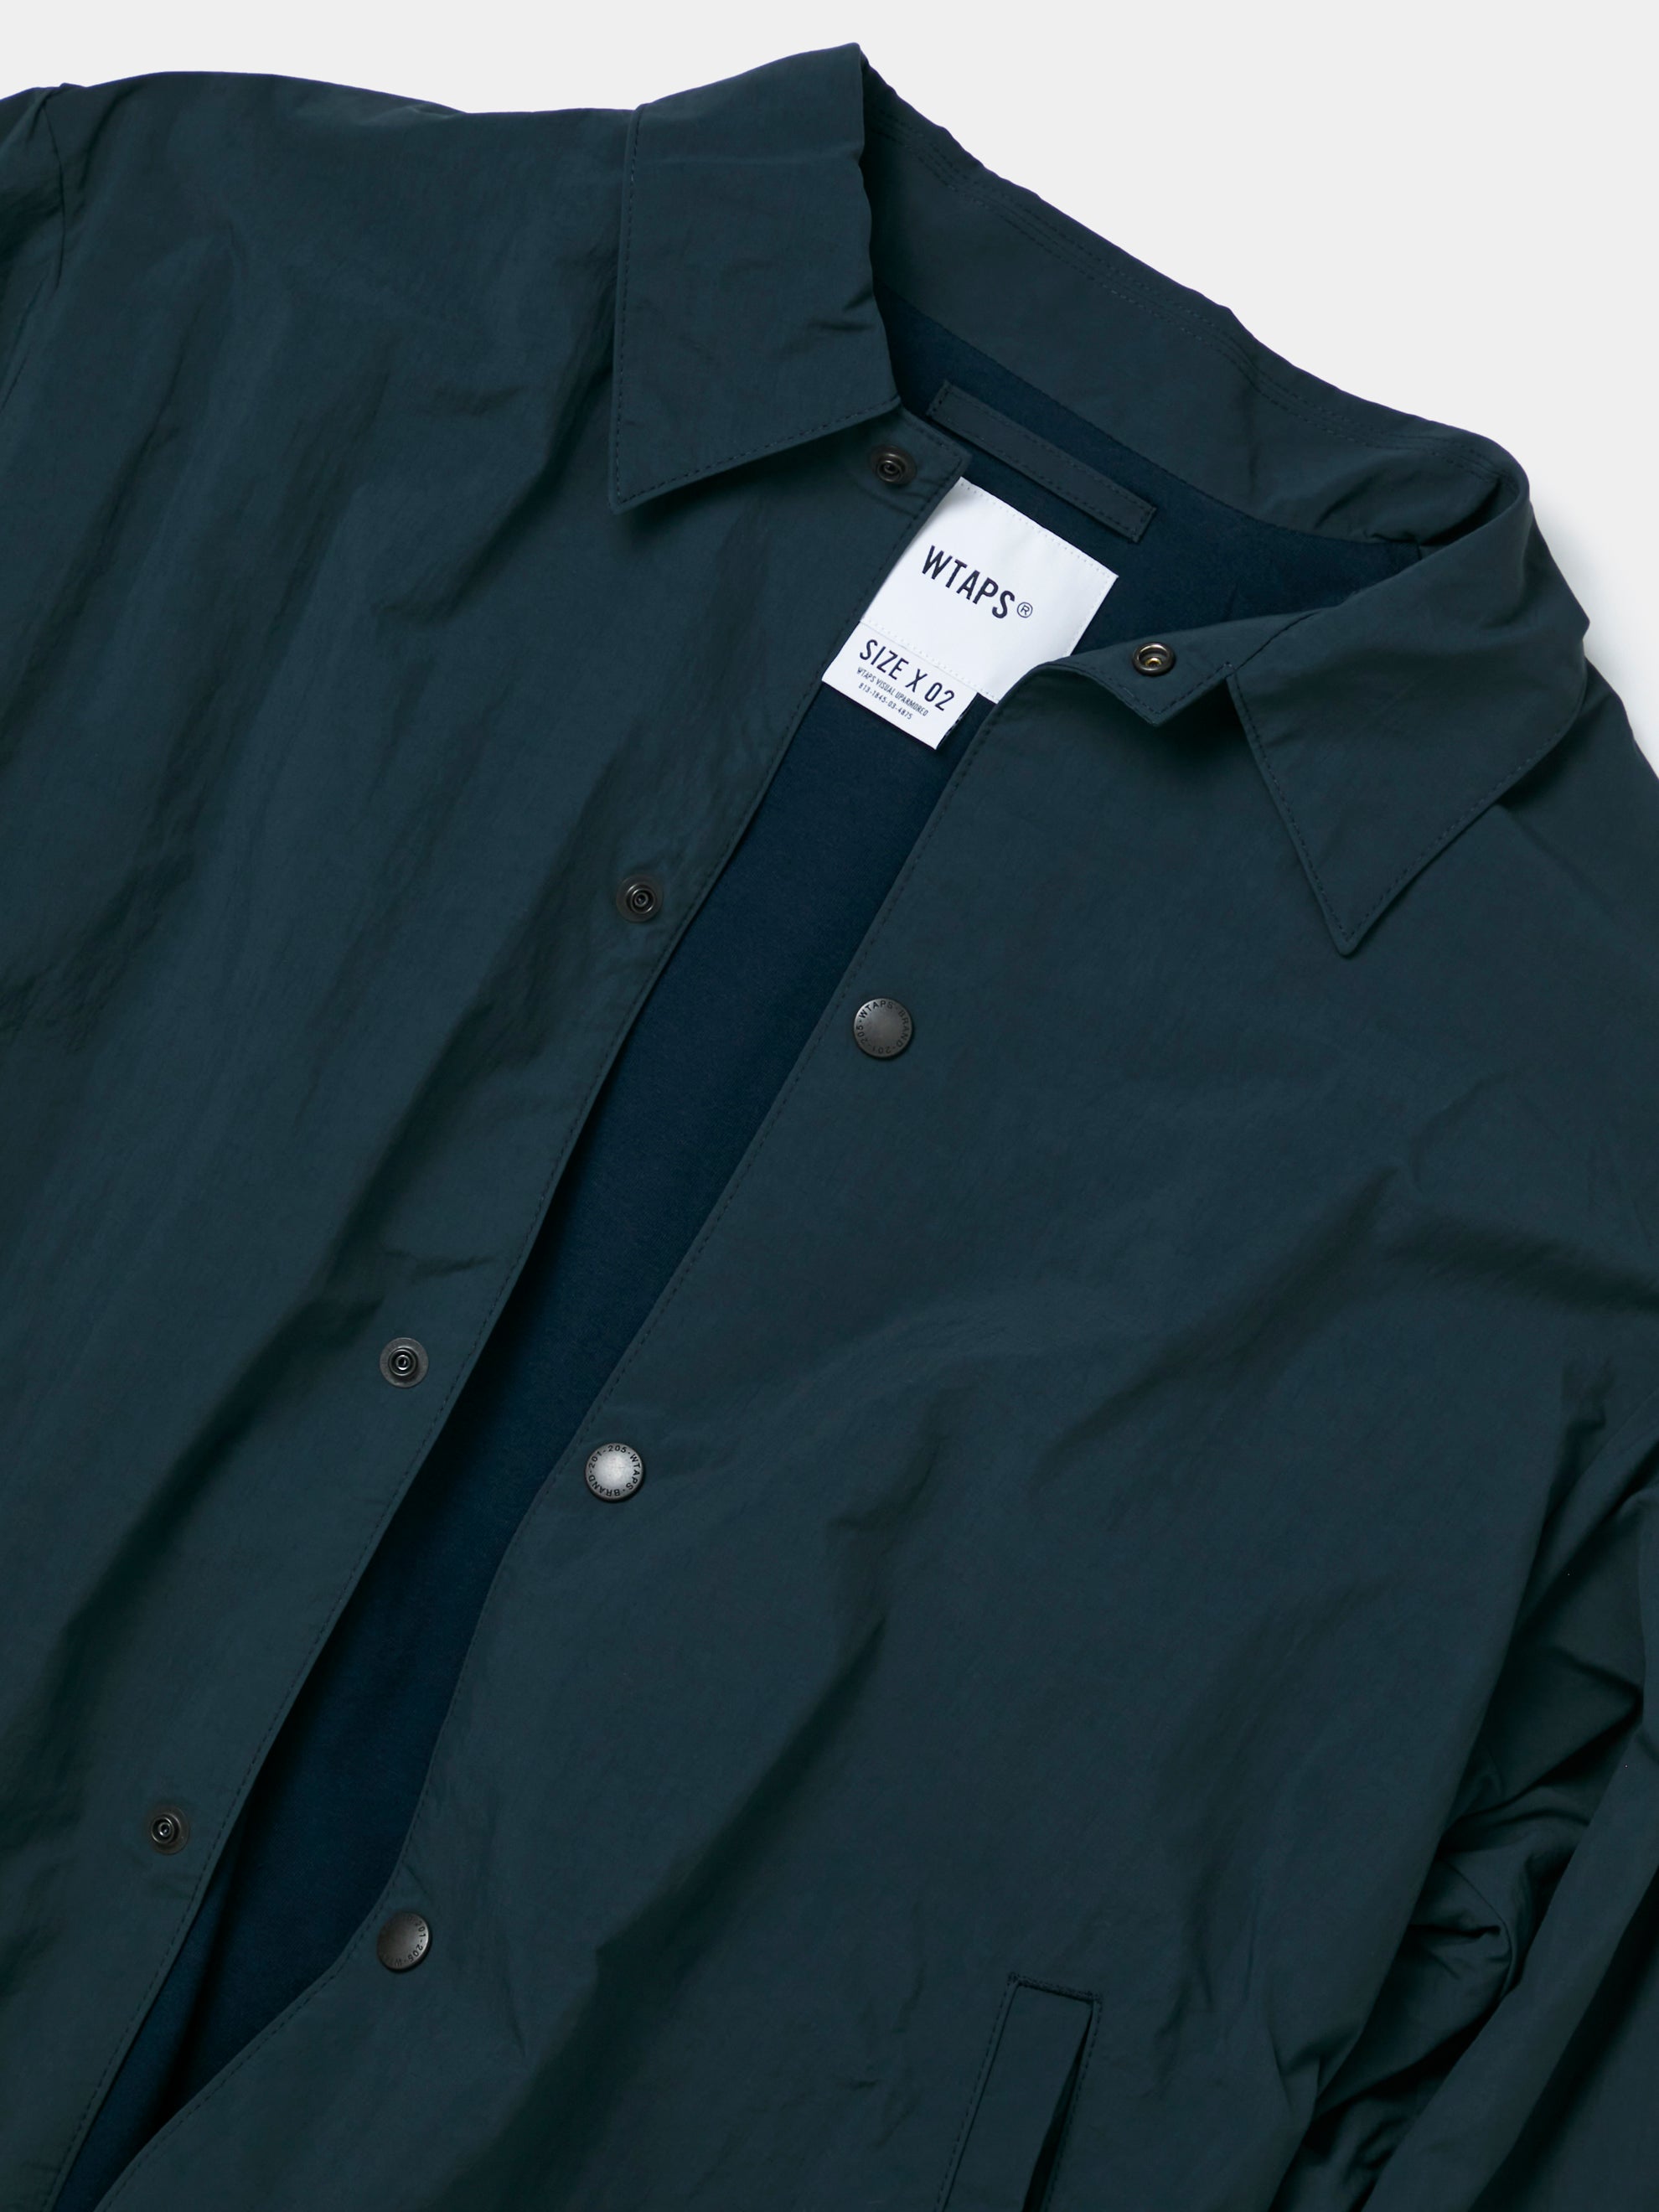 Buy Wtaps CHIEF / JACKET / NYLON. WEATHER. SIGN (NAVY) Online at